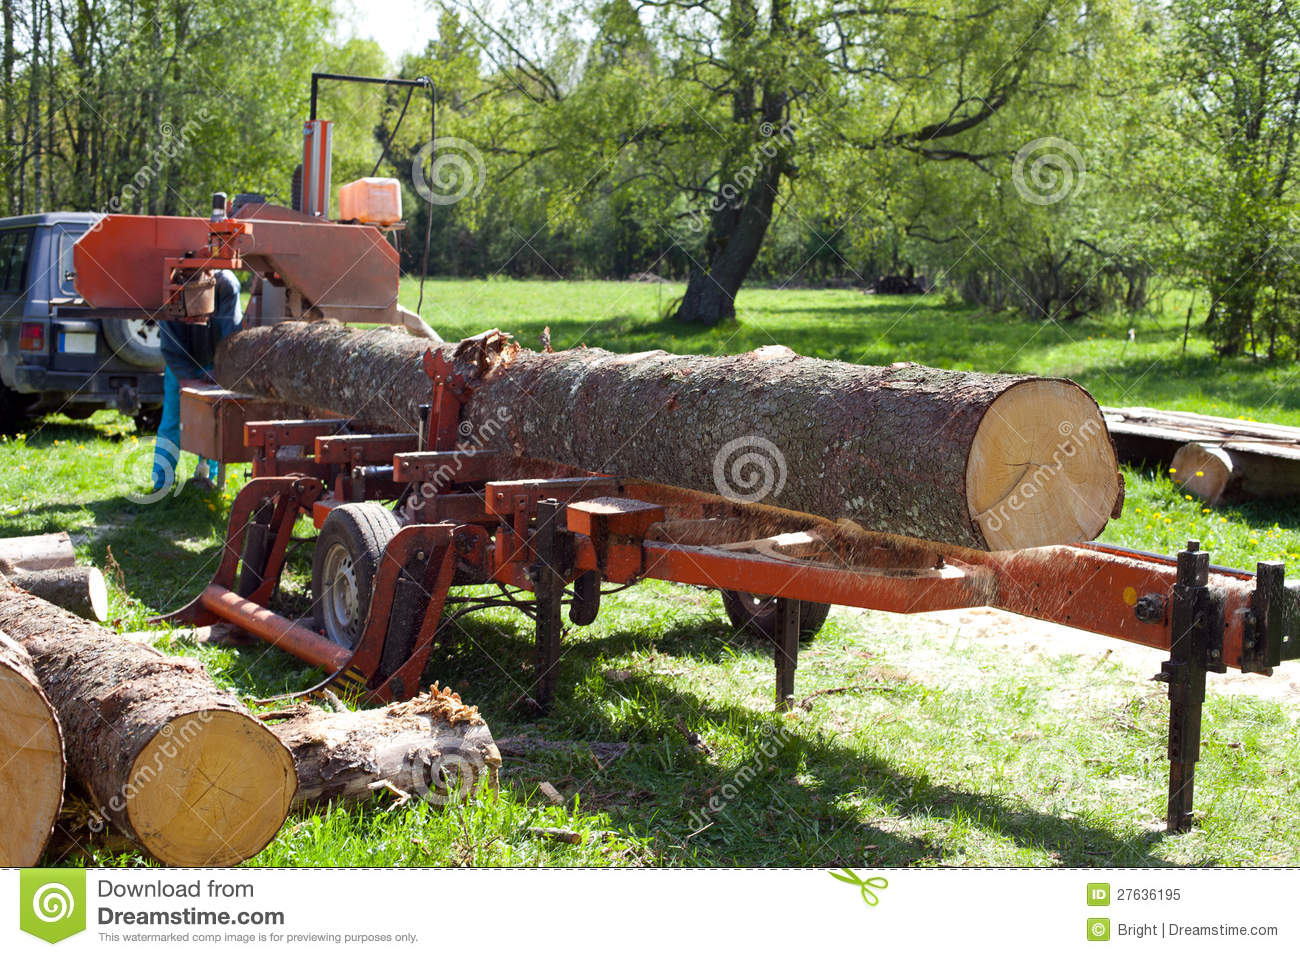 Mobile Sawmill Royalty Free Stock Photo   Image  27636195